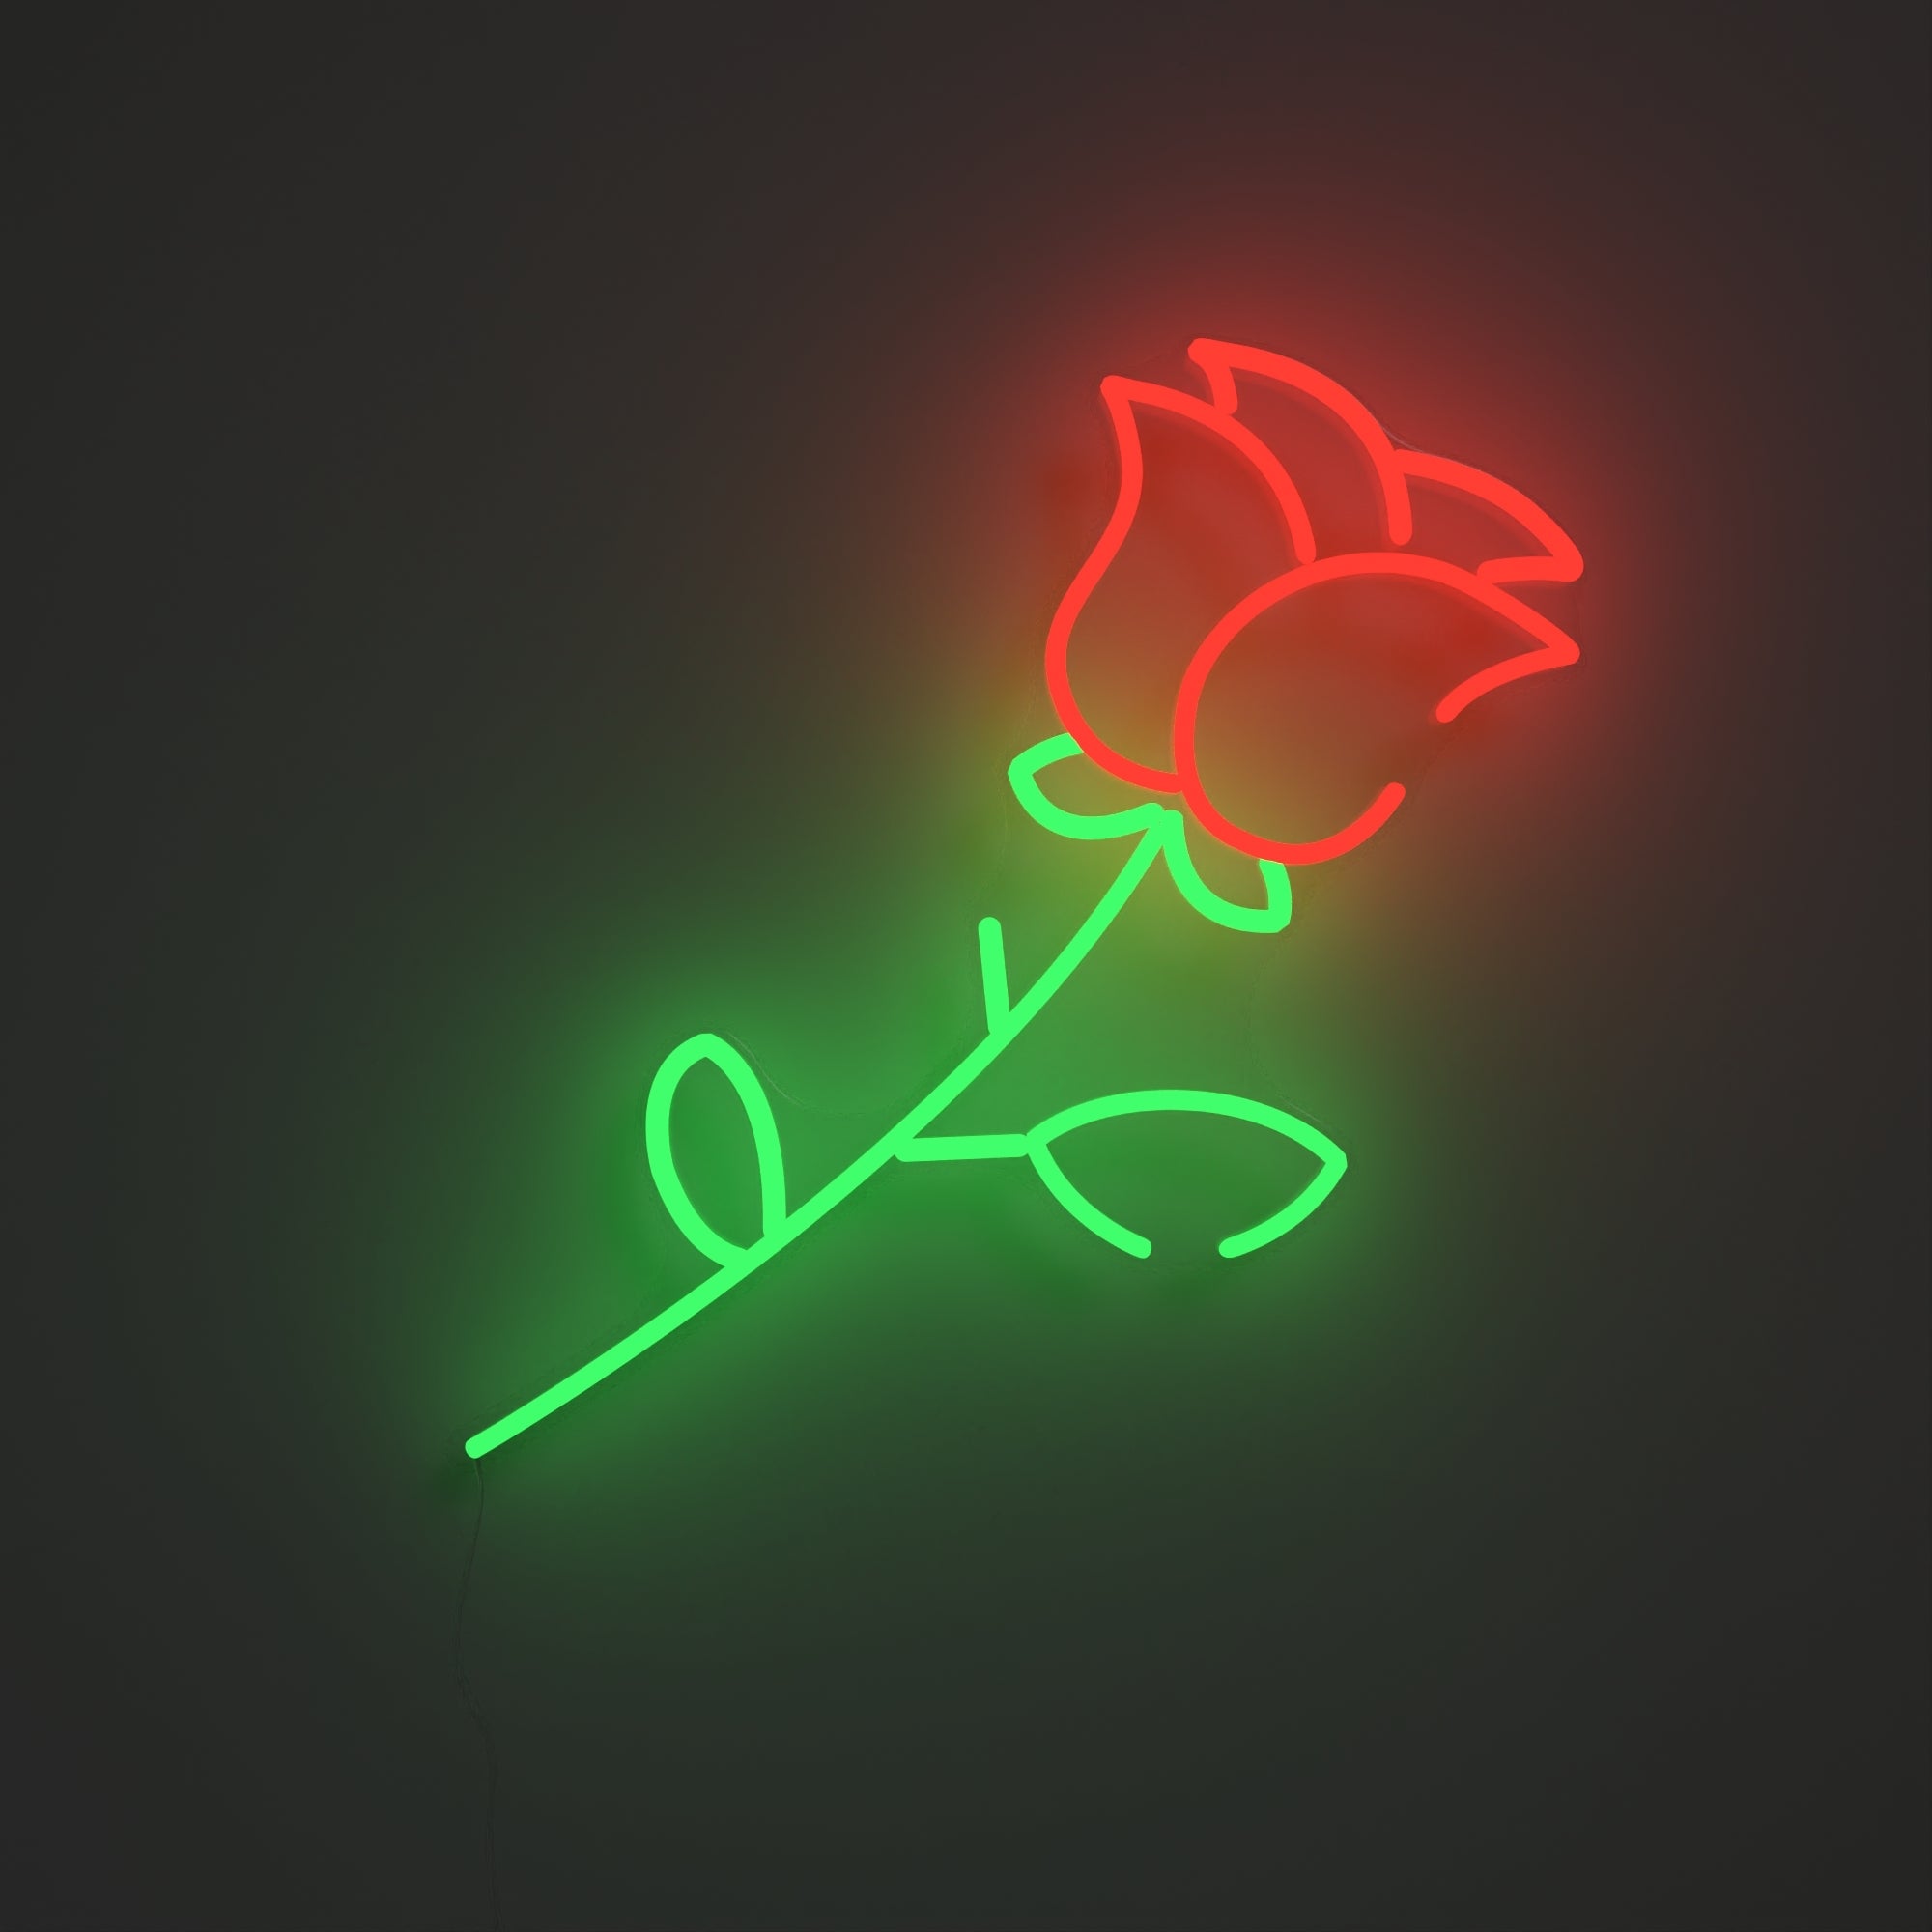 Rose Neon Sign